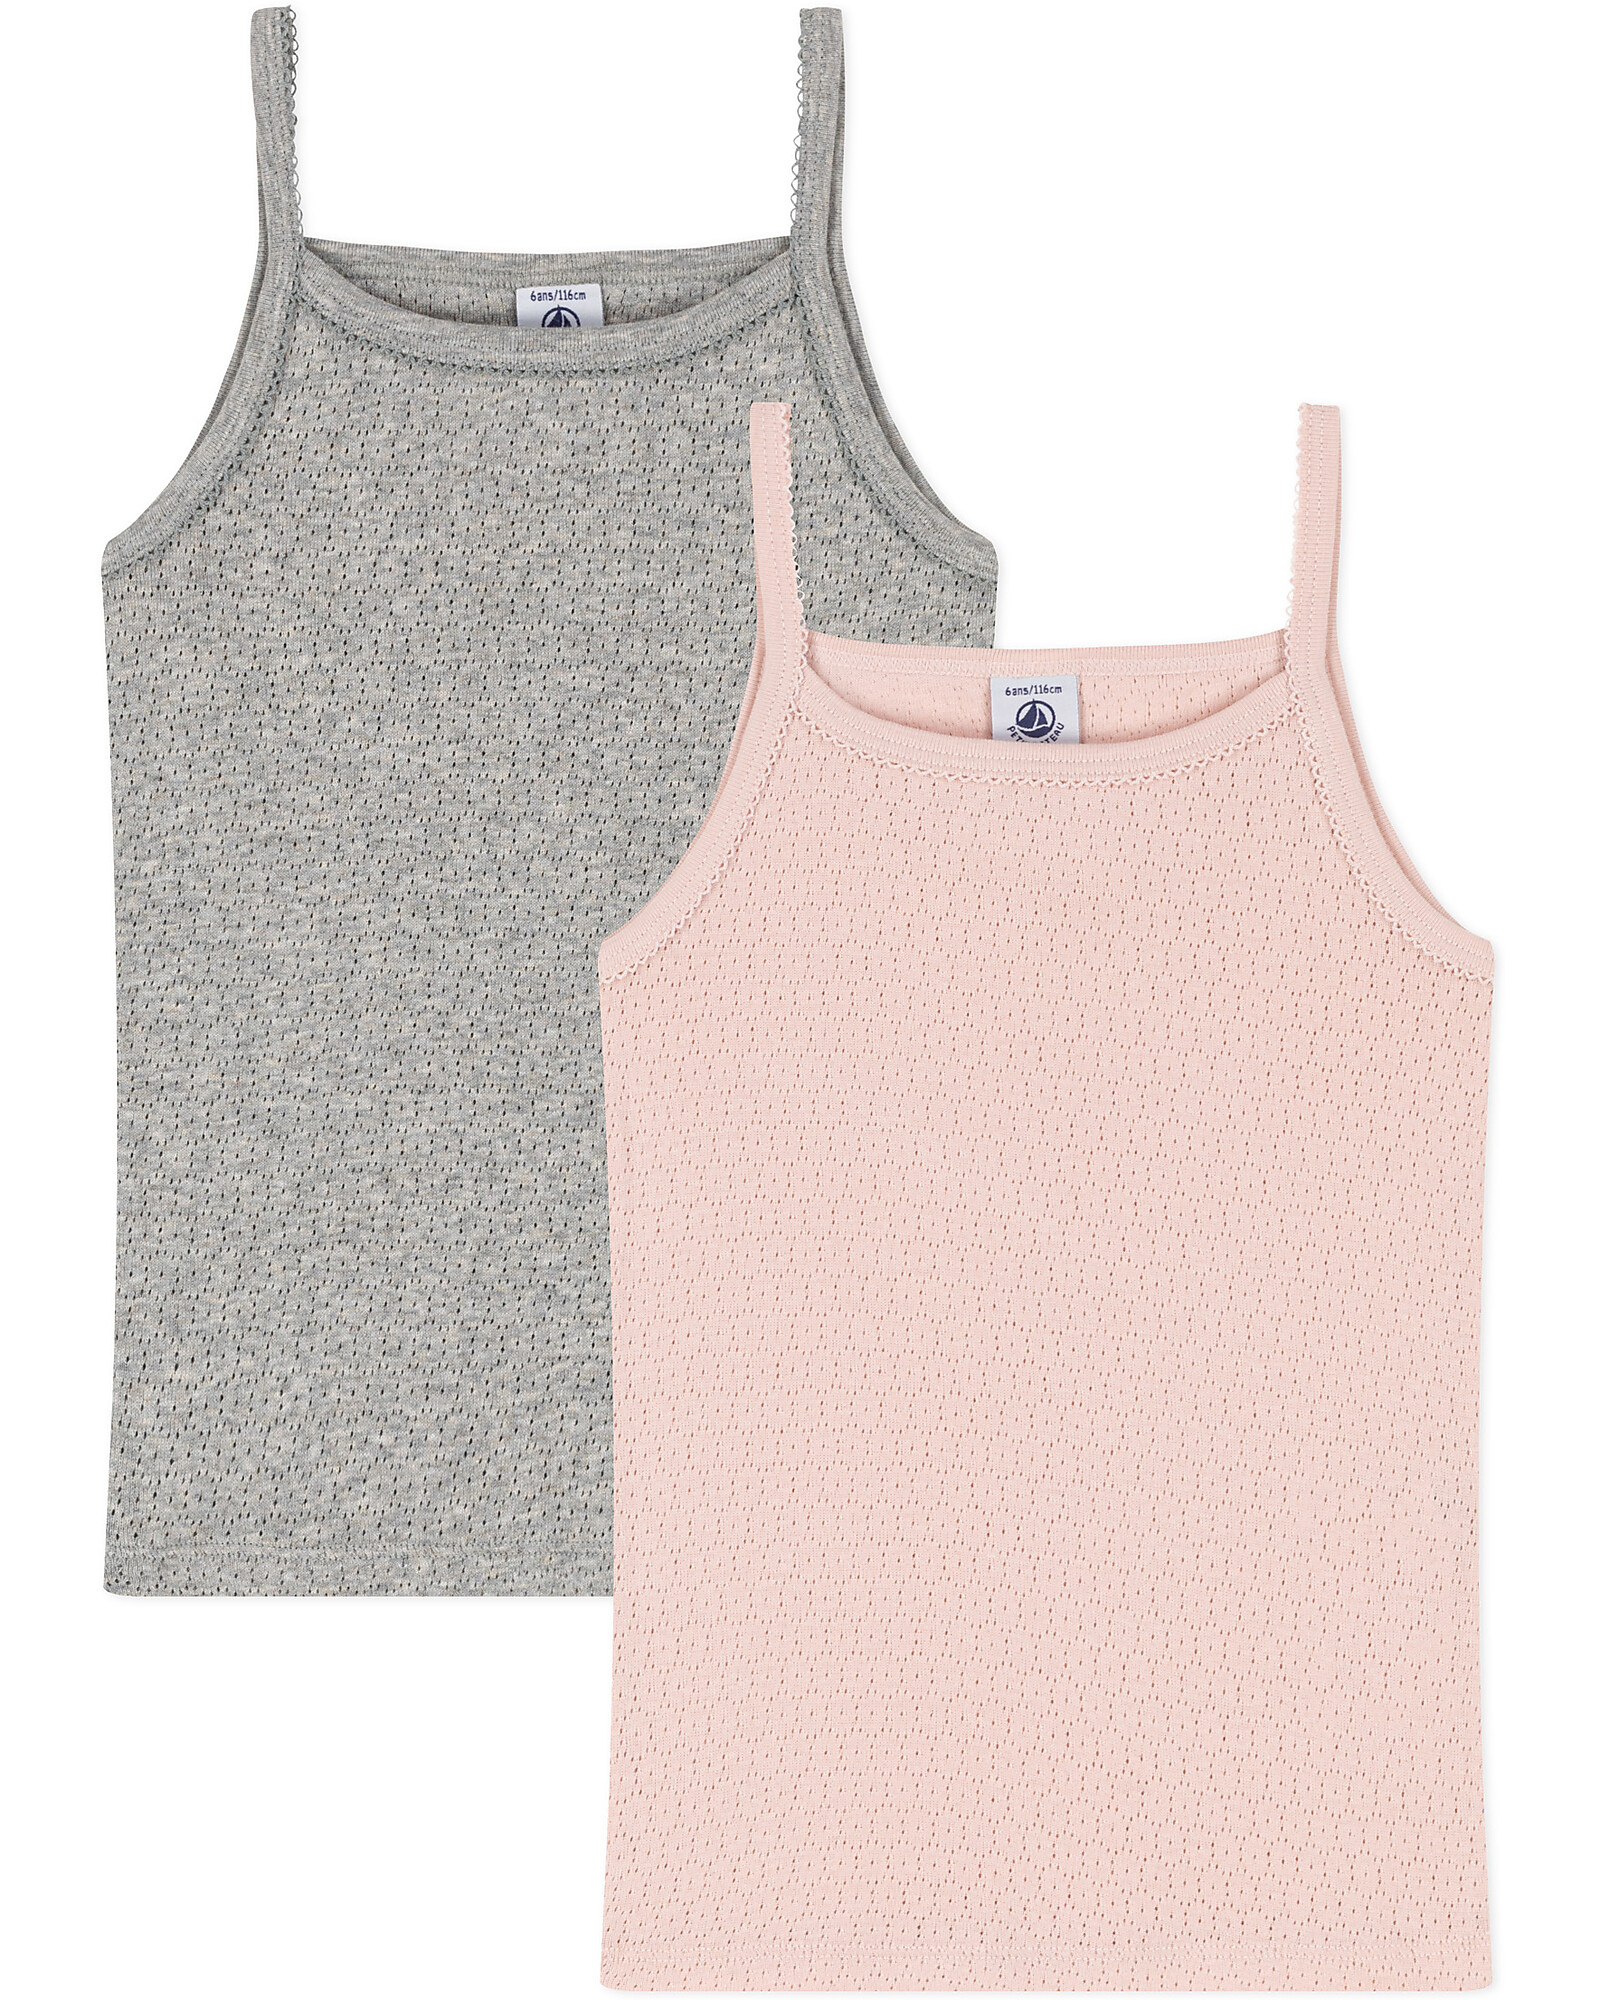 Petit Bateau Tank Top with Straps - Pack of 2 - Grey/Pink - 100% Organic  Cotton unisex (bambini)